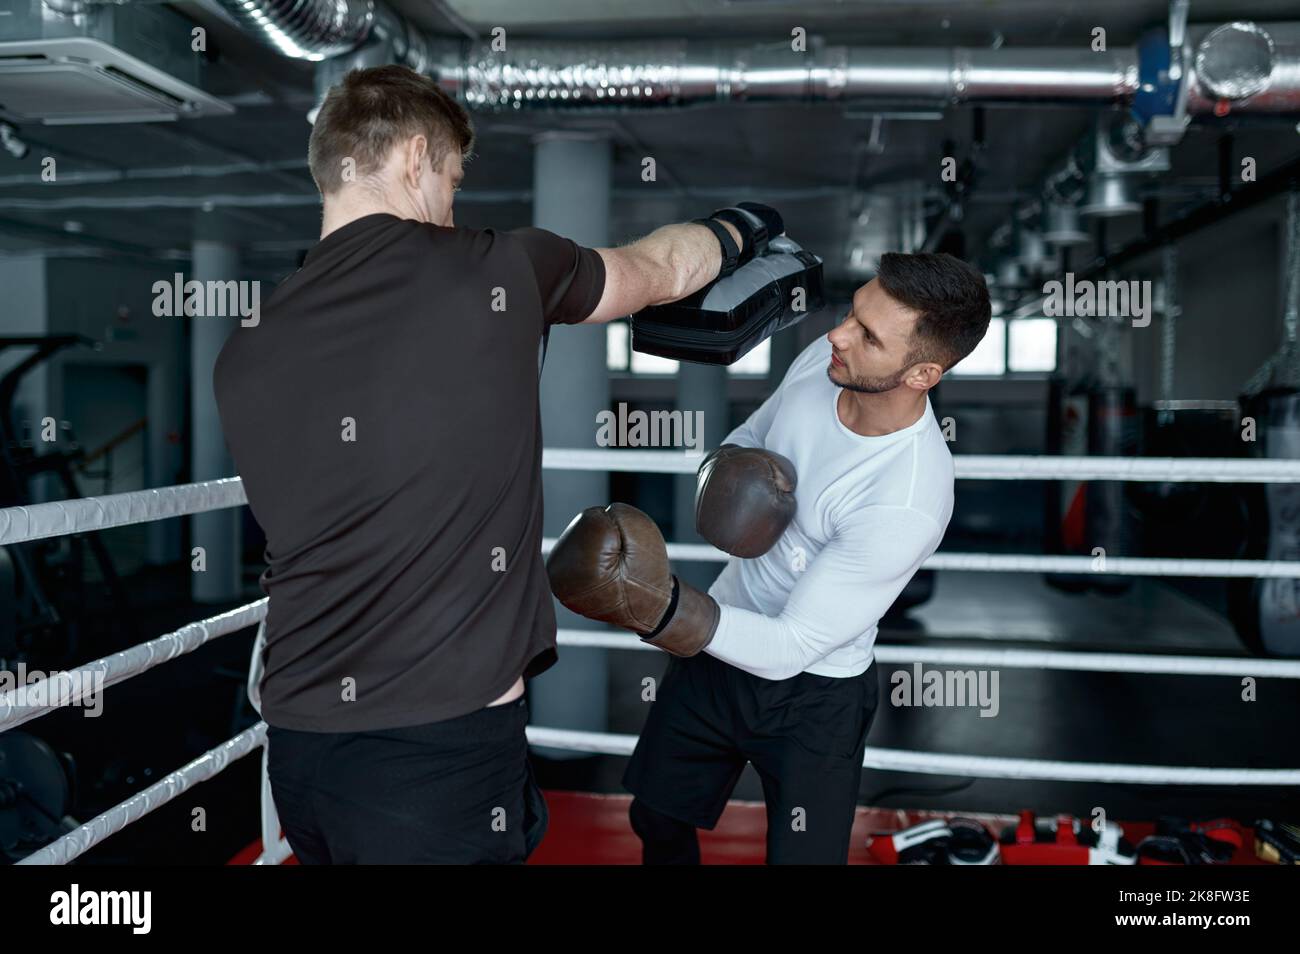 Two sparring partners in boxing gloves practice kicks Stock Photo